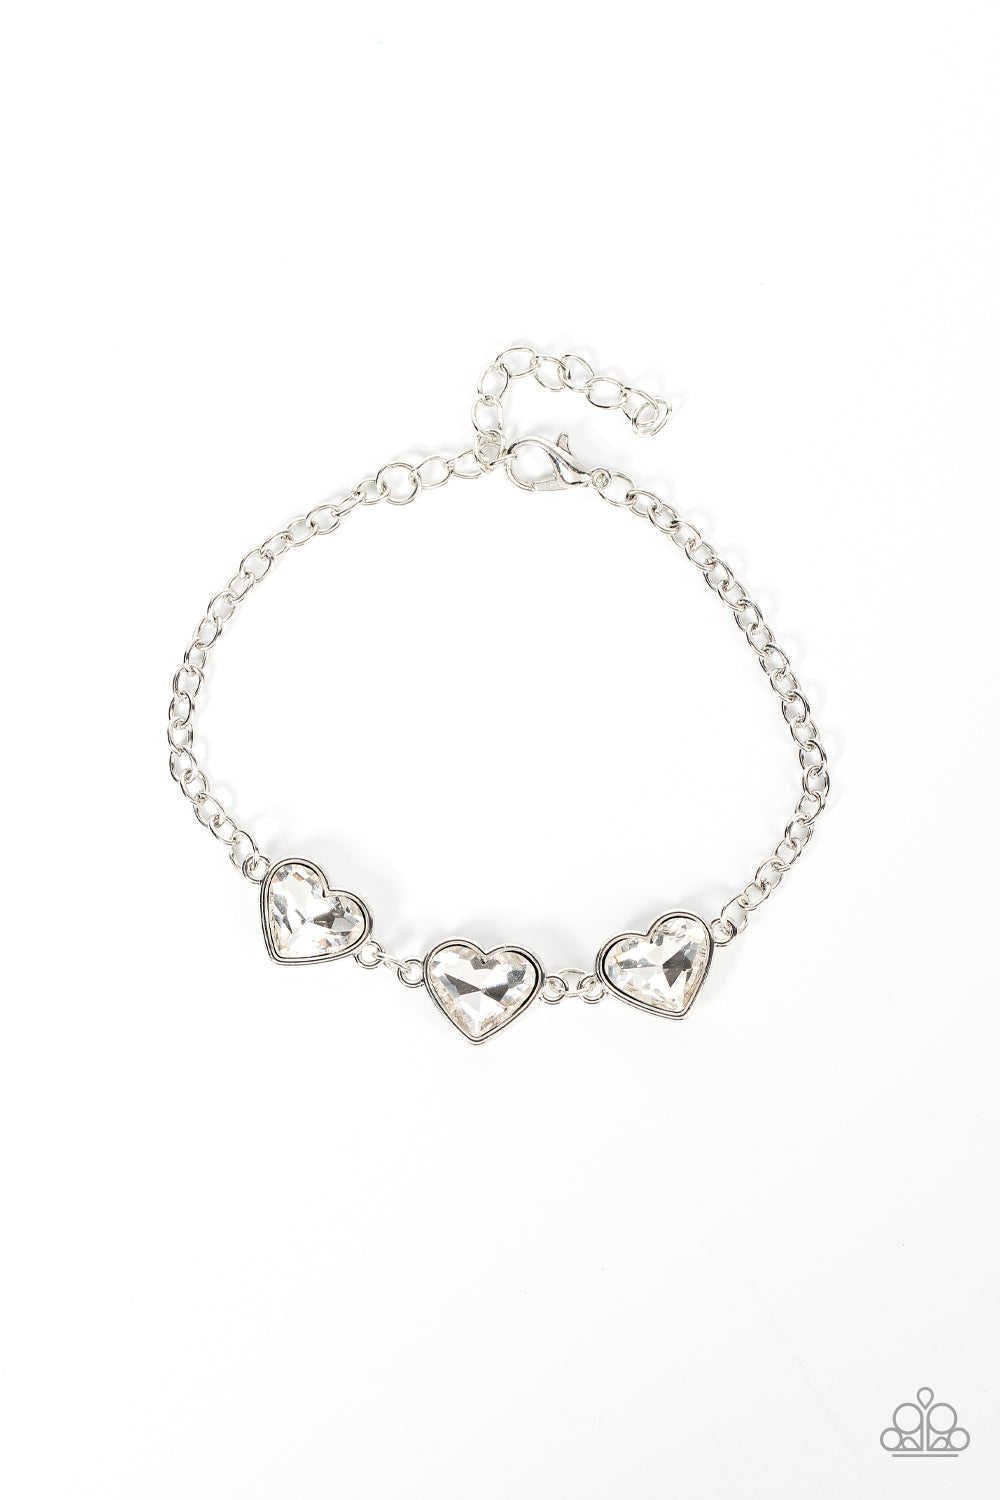 Little Heartbreaker - White Heart Shape Gems - Silver Bracelet - Paparazzi Accessories - Nestled in silver frames, a trio of glittery white heart-shaped gems delicately links across the wrist for a dash of swoon-worthy shimmer. Features an adjustable clasp closure. Sold as one individual fashion bracelet.